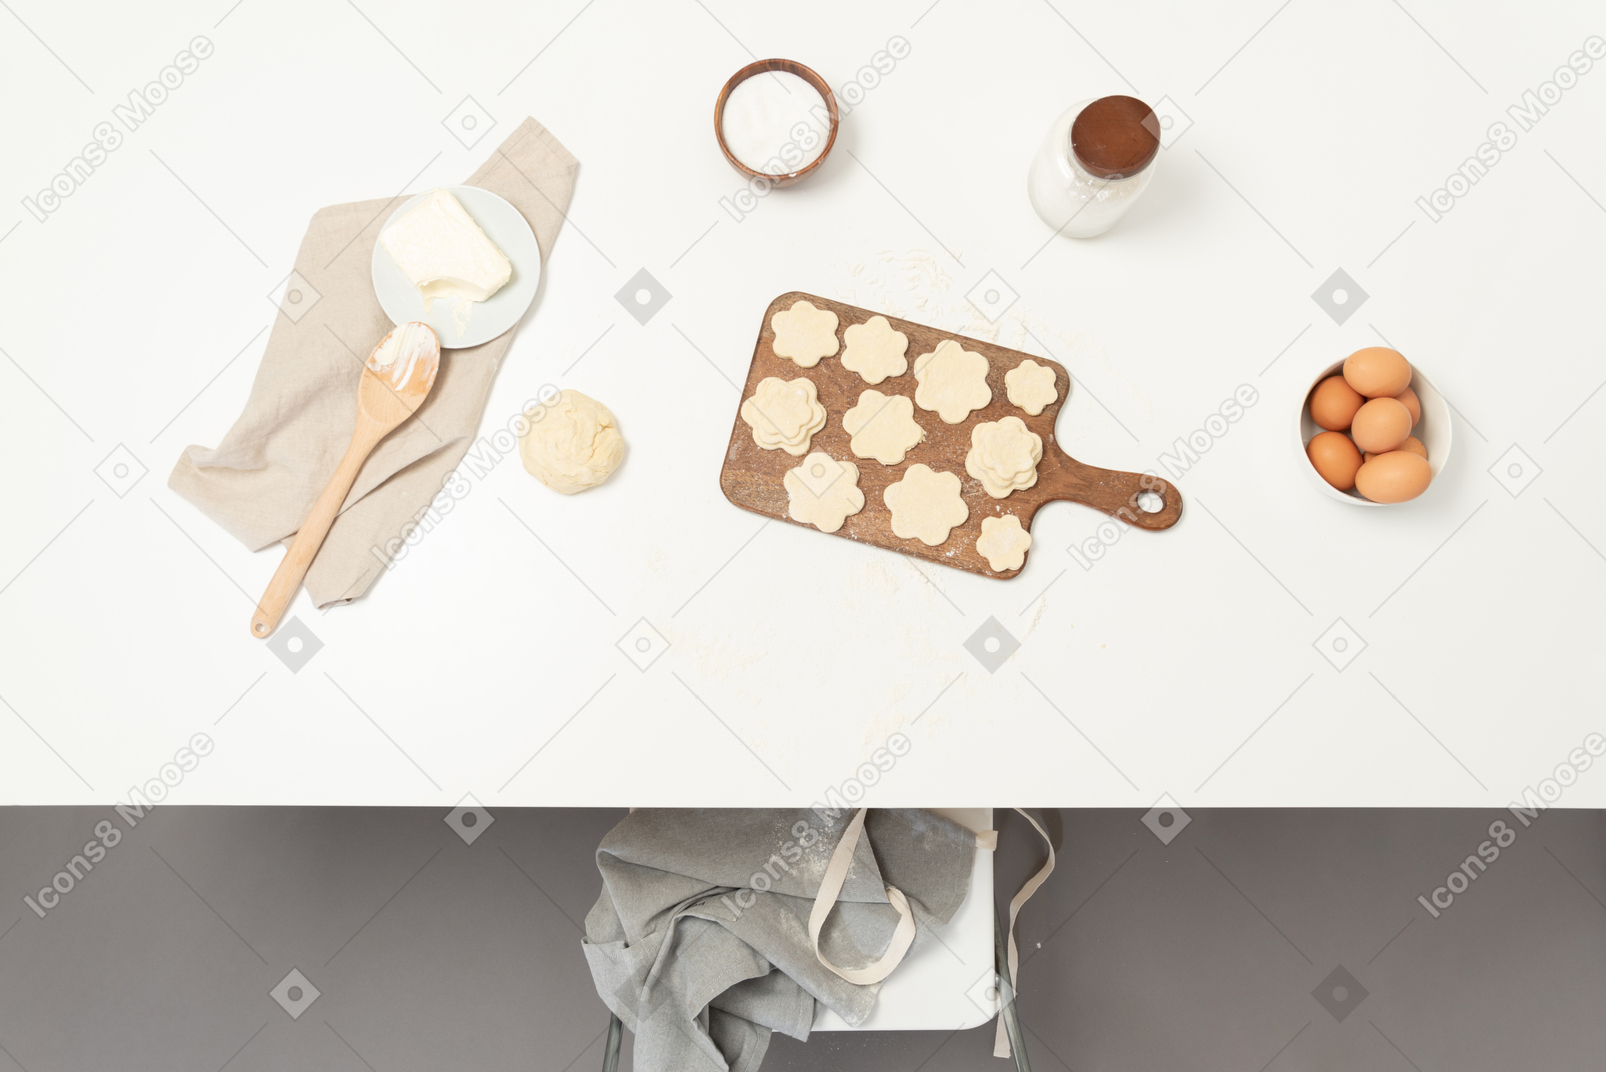 A table with cookies prepared for baking